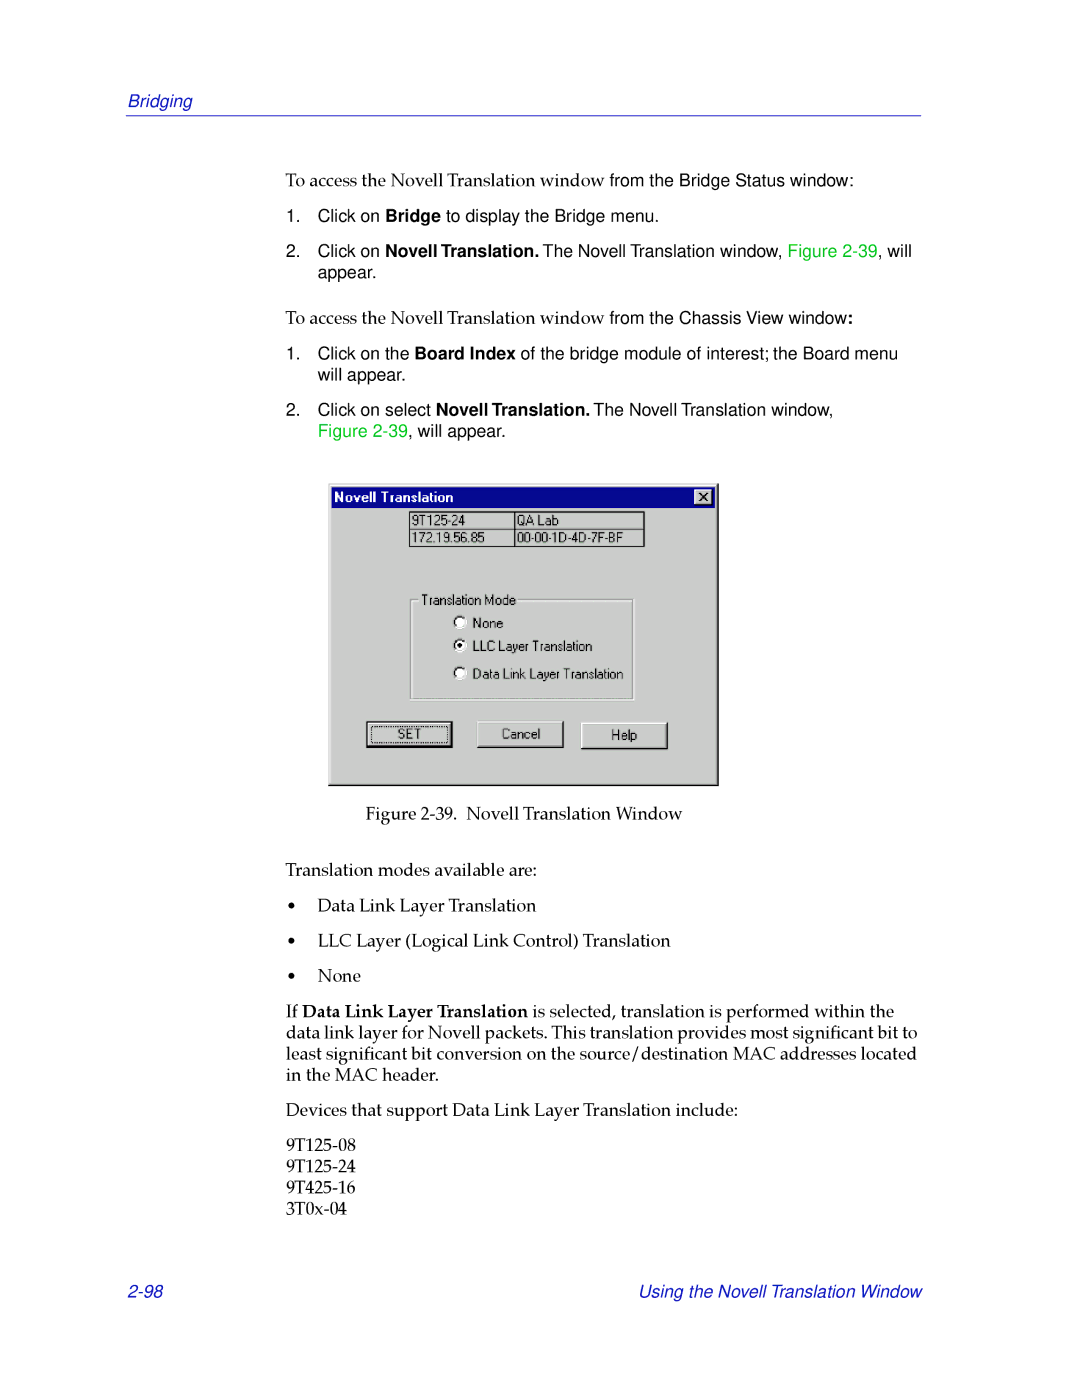 Cabletron Systems 2.2 manual Bridging 